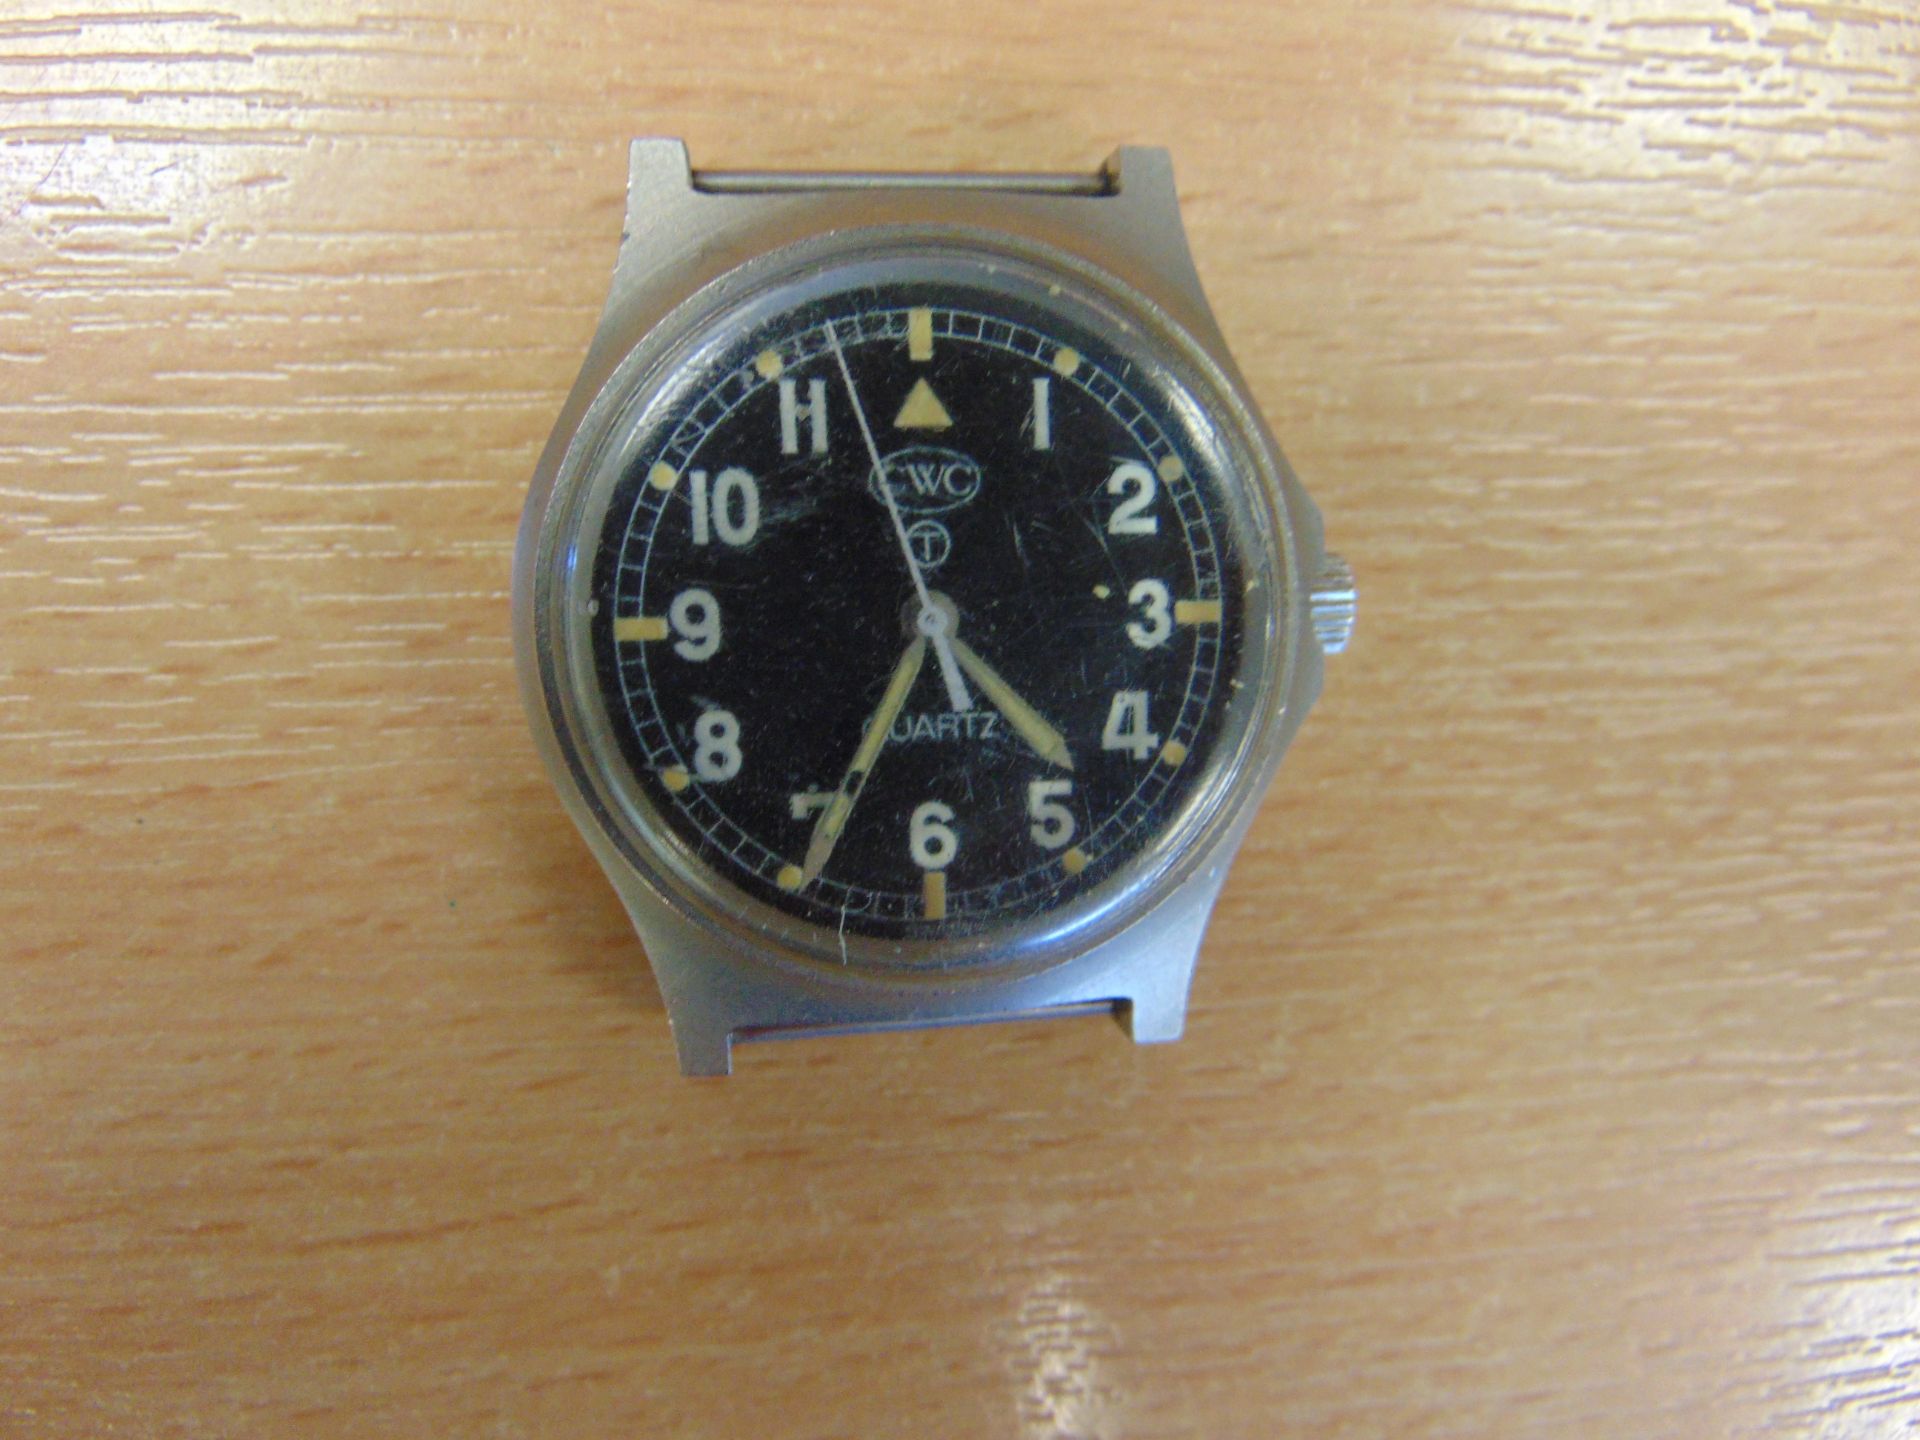 VERY RARE CWC W10 FAT BOY SERVICE WATCH DATED 1982 (FALKLANDS) - Image 11 of 14